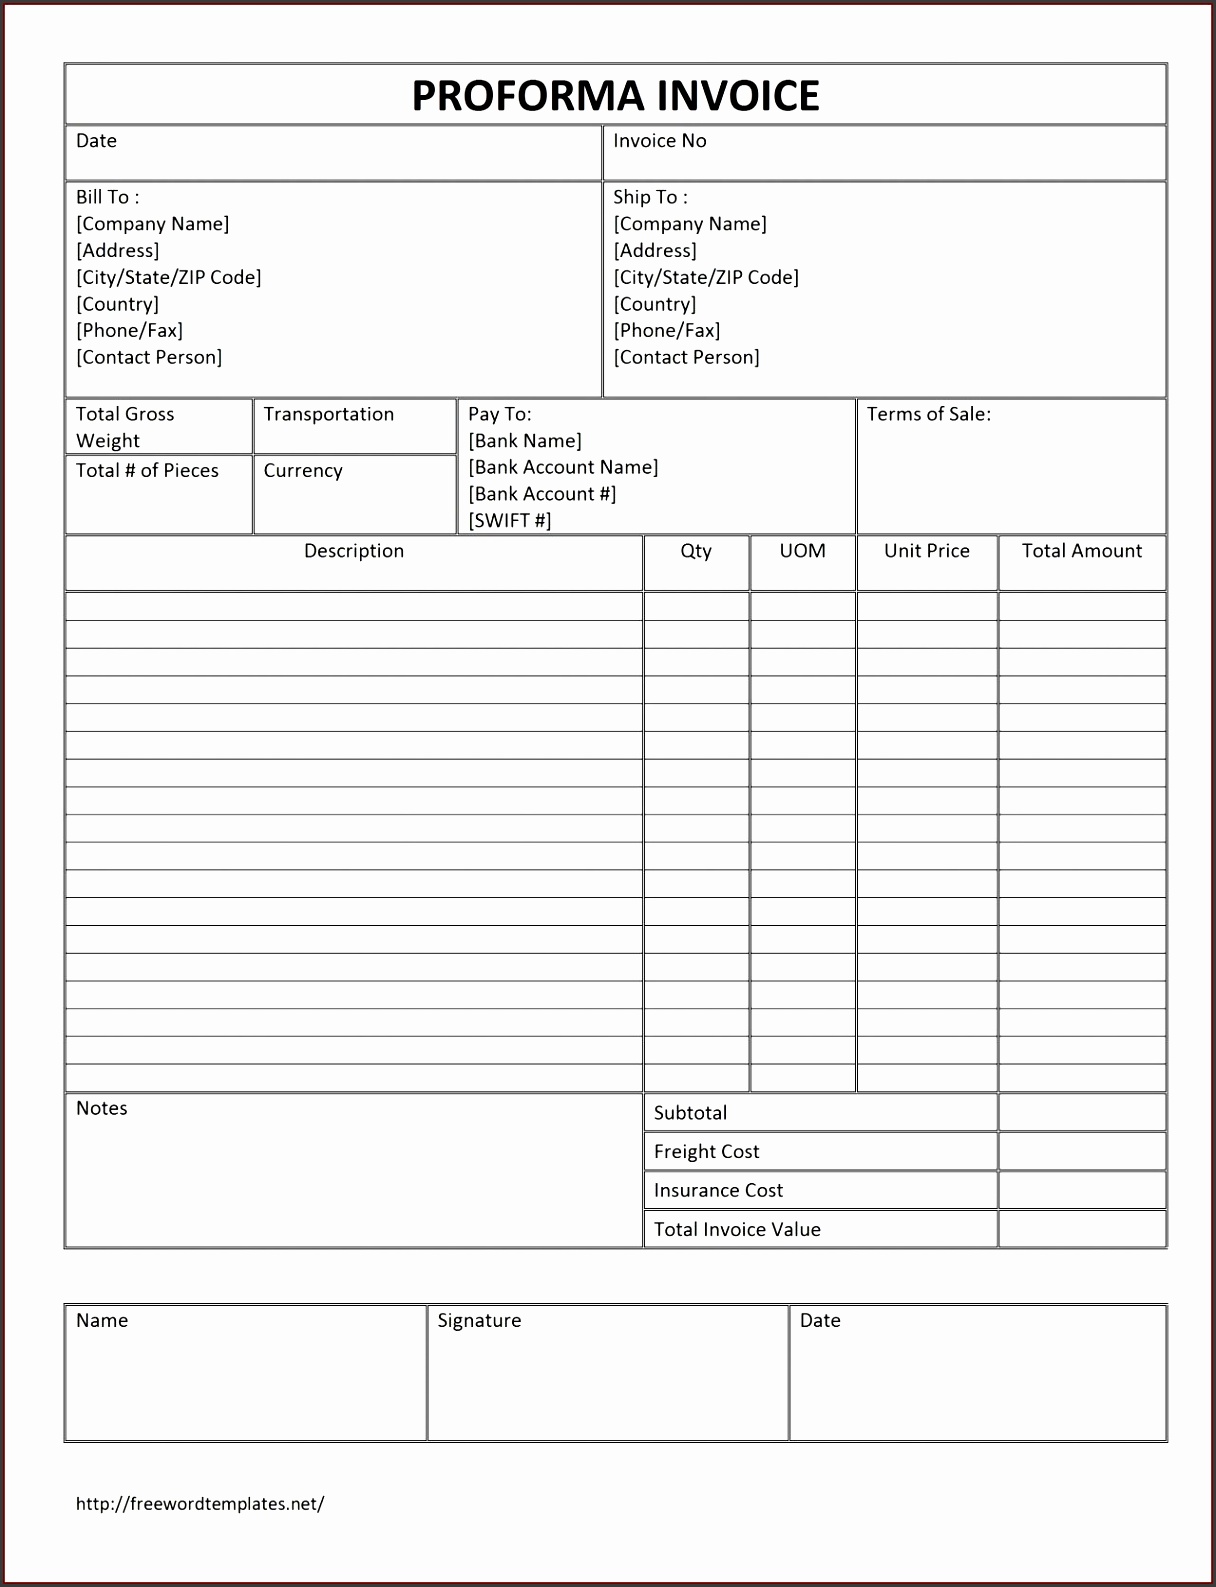 excel banking template images templates example free service invoice format hotel taxi bill fare in